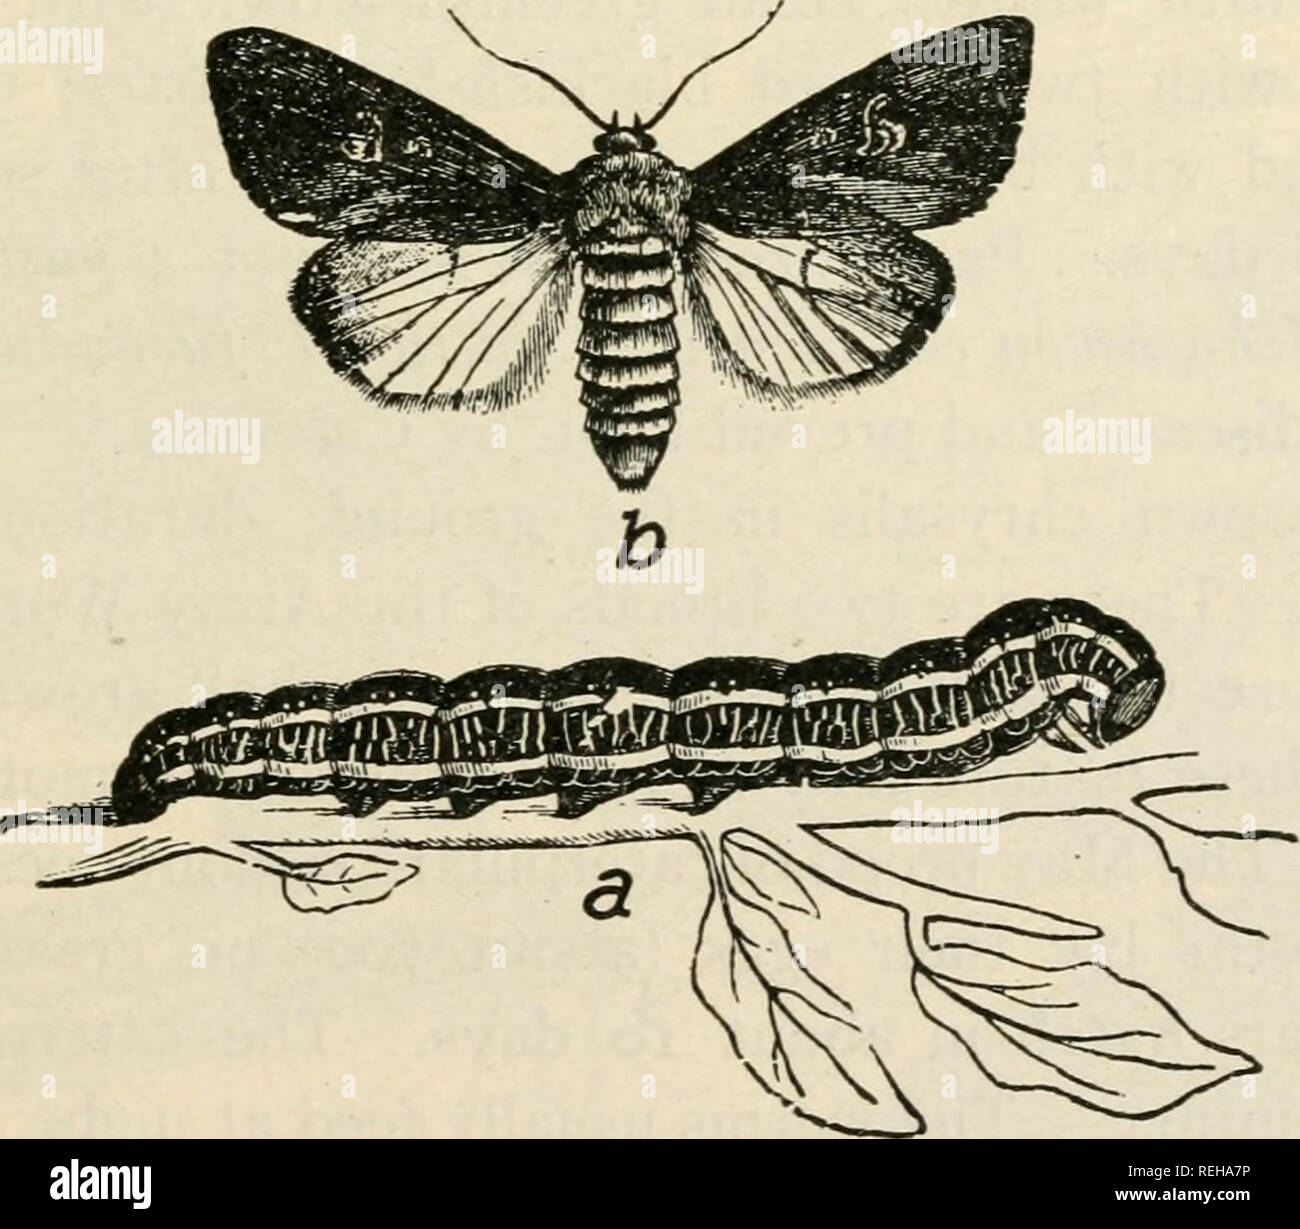 . Class book of economic entomology. Insects, Injurious and beneficial. [from old catalog]; Insects; Insects. Fig. 127.—a, Moth of Yellow-headed Cutworm {Septis arctica); b, moth of Clover Cutworm {Scotogramma trifolii); c, moth of Pale Western Cutworm {Porosagrotis orthogonia); d, moth of Dingy Cutworm (Felia ducens). {After Gibson, Bui, 10, Ent. Br. Can.). Fig. 128.—The zebra caterpillar and moth {Ceramica picta). Clover Cutworm {Scotogramma trifolii Esp.).—Color varying from green to dark; a pale yellowish line along middle of back, a pinkish band bordered with white or pale yellow along ea Stock Photo